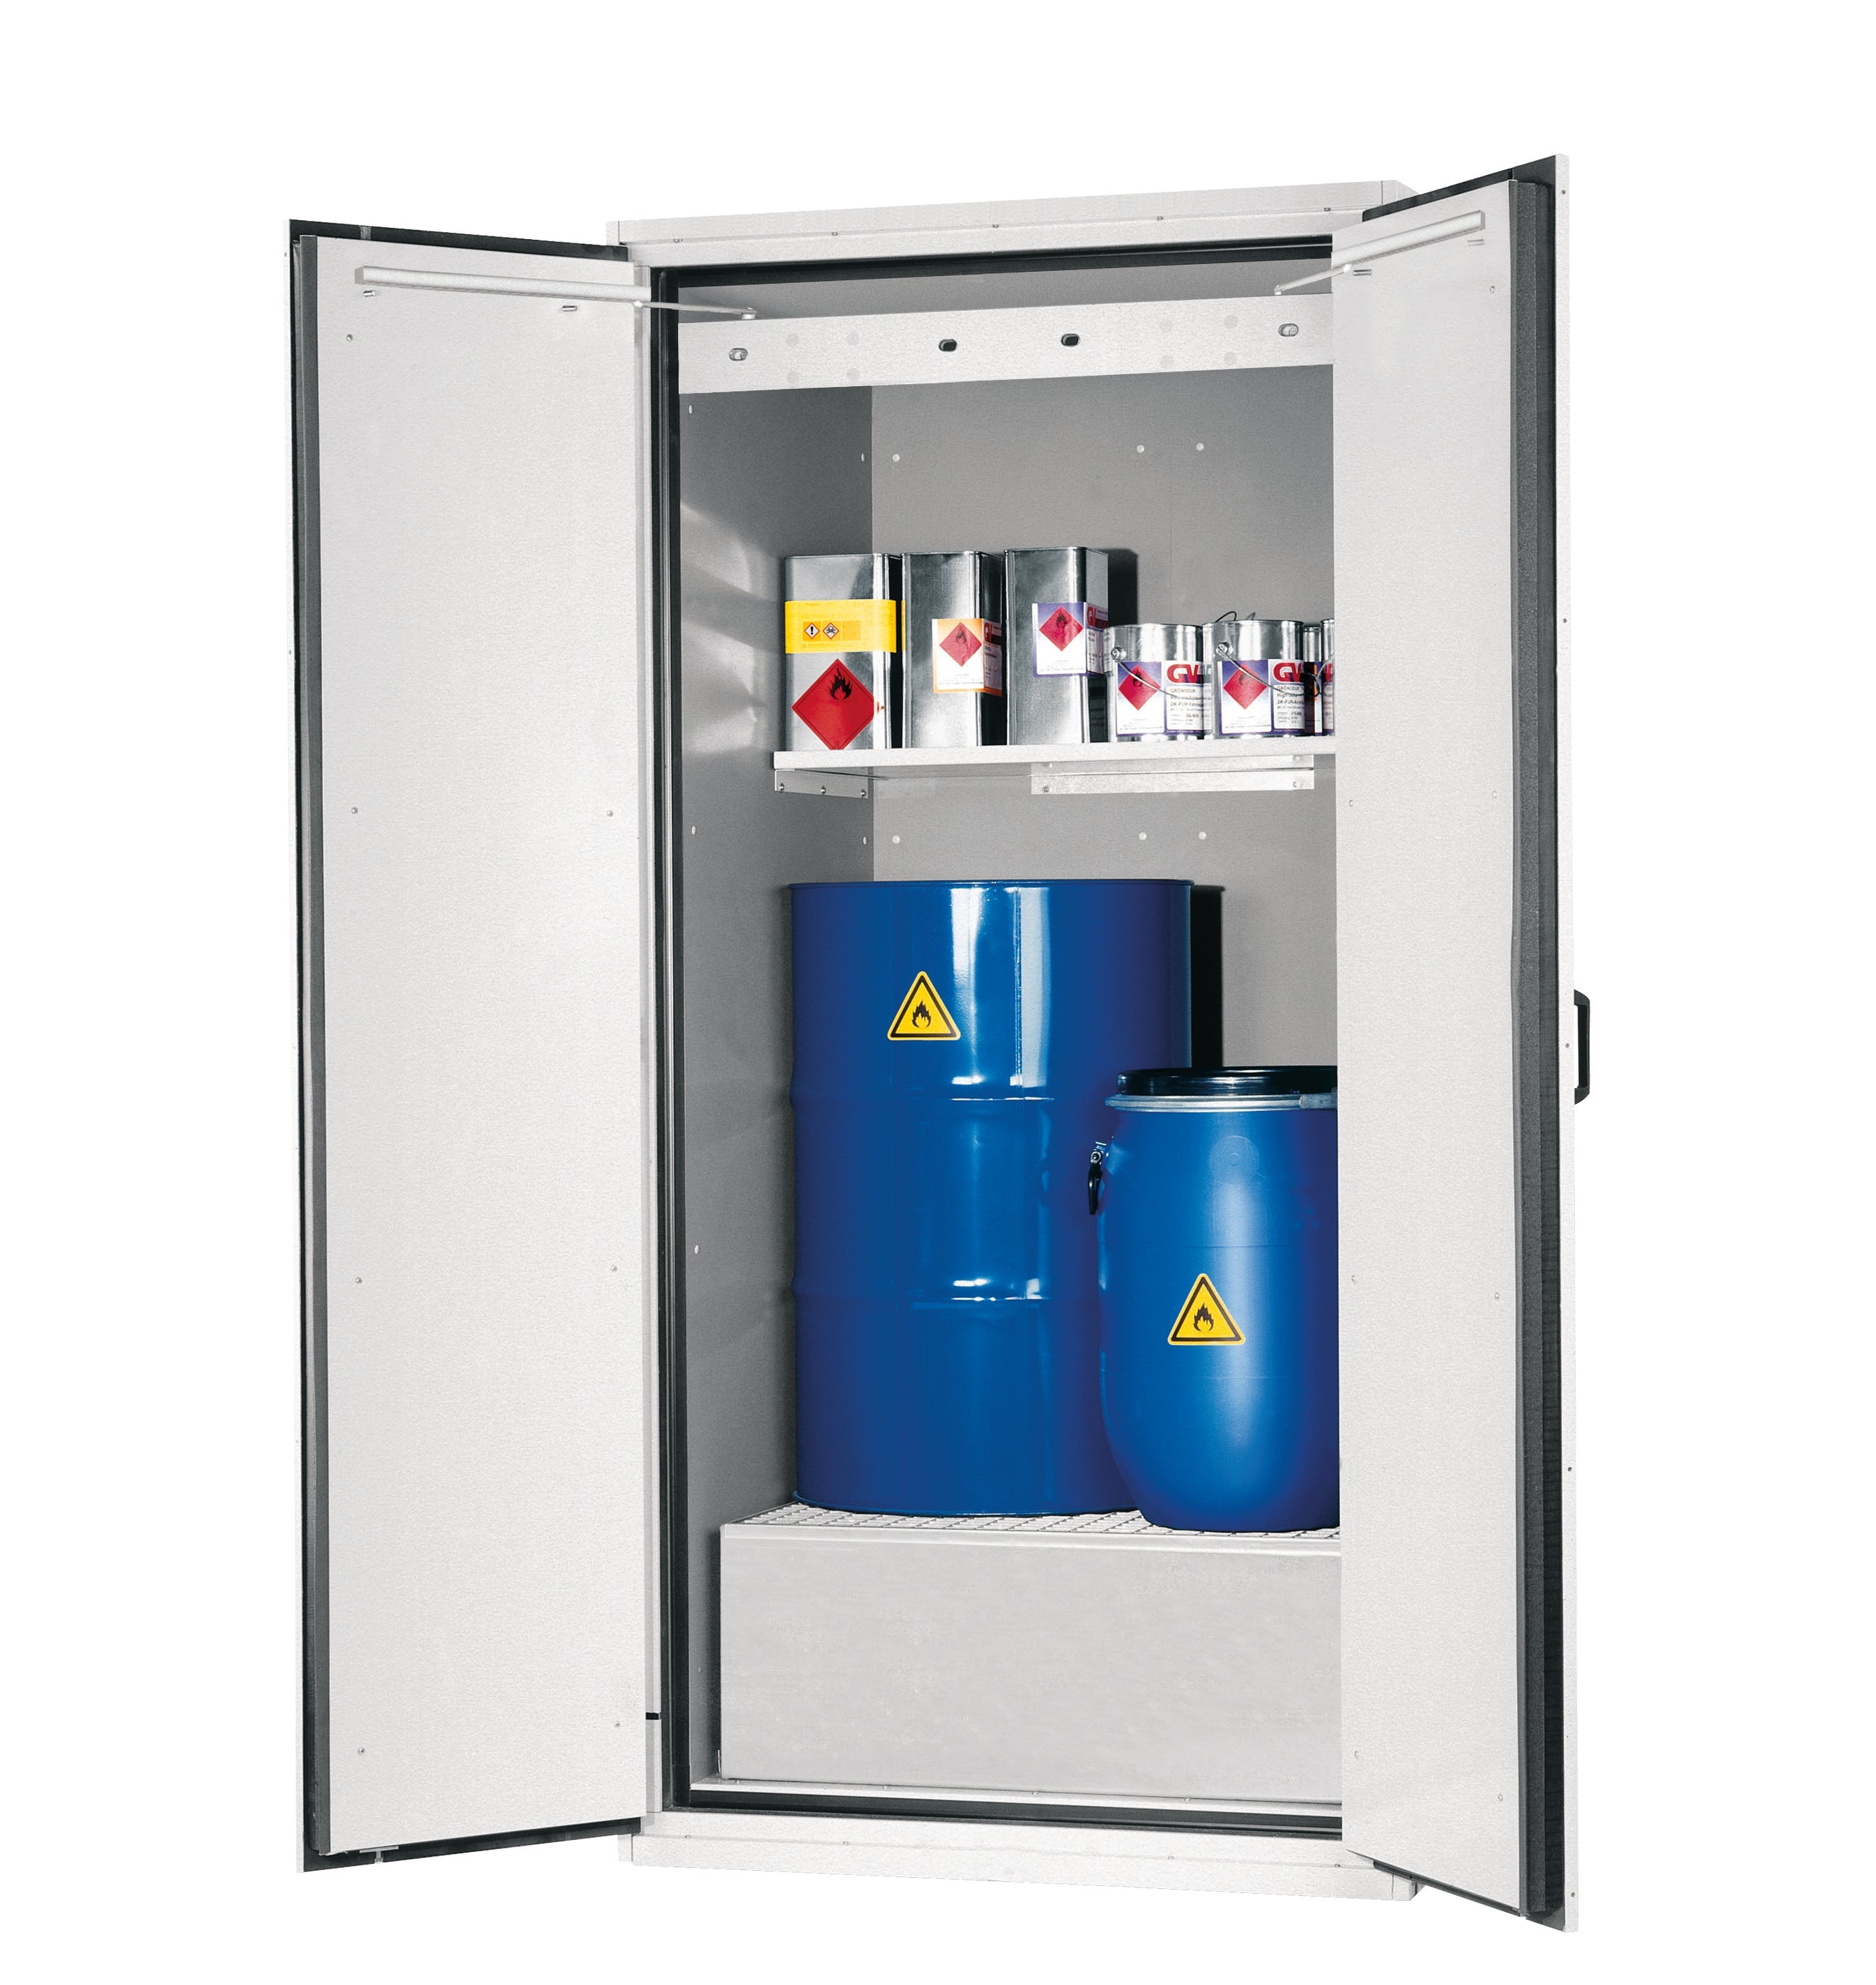 Type 90 safety cabinet XL-CLASSIC-90 model XL90.222.110.WDAS in light gray RAL 7035 with 1x standard shelf (sheet steel)